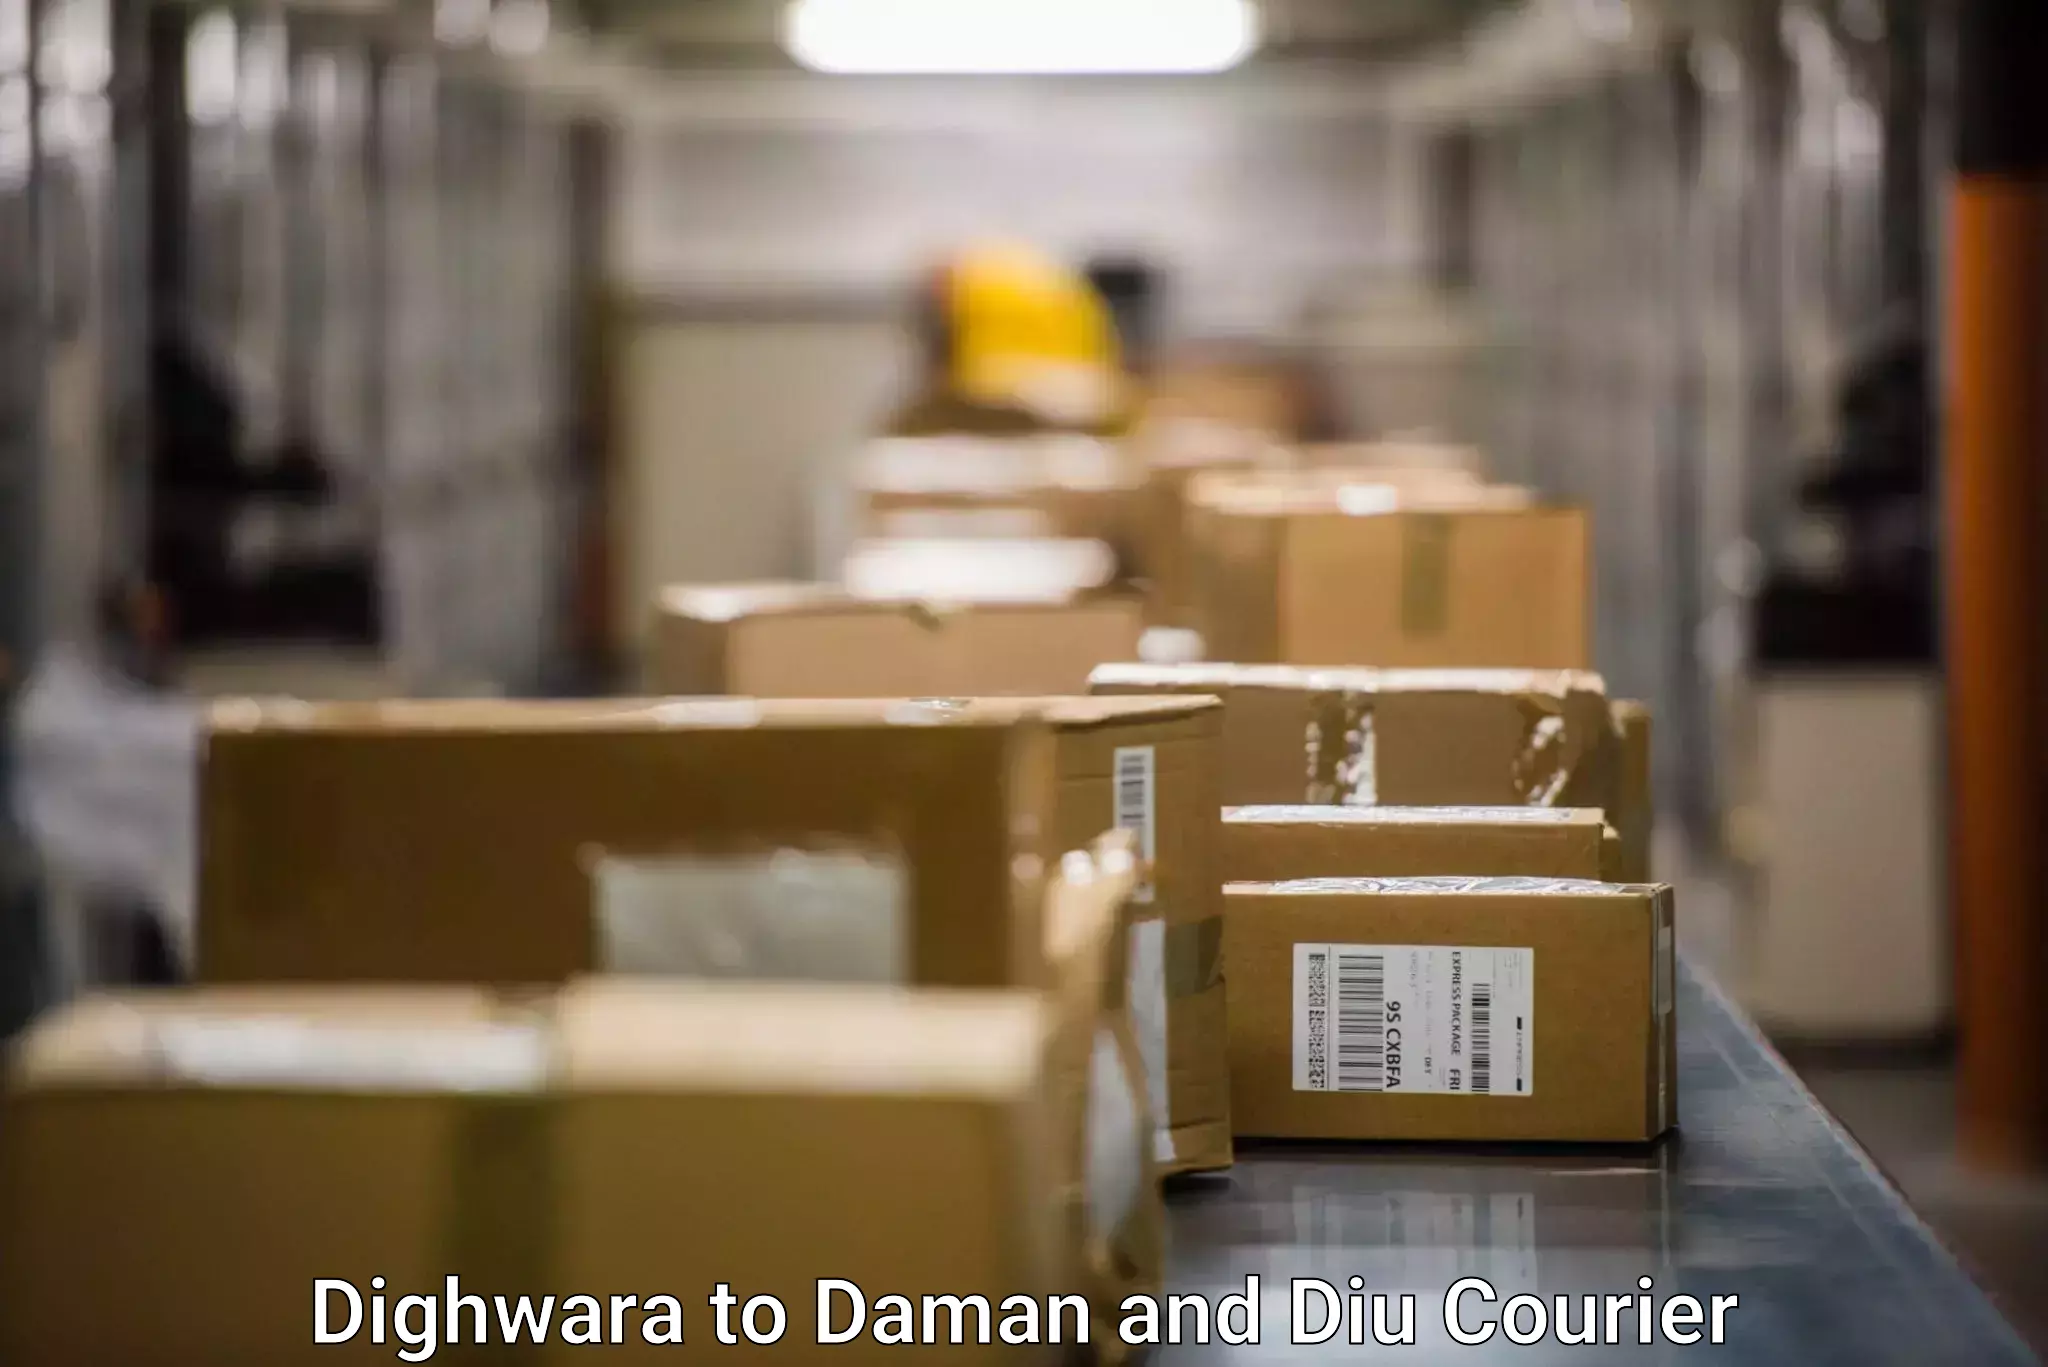 Express delivery solutions Dighwara to Daman and Diu